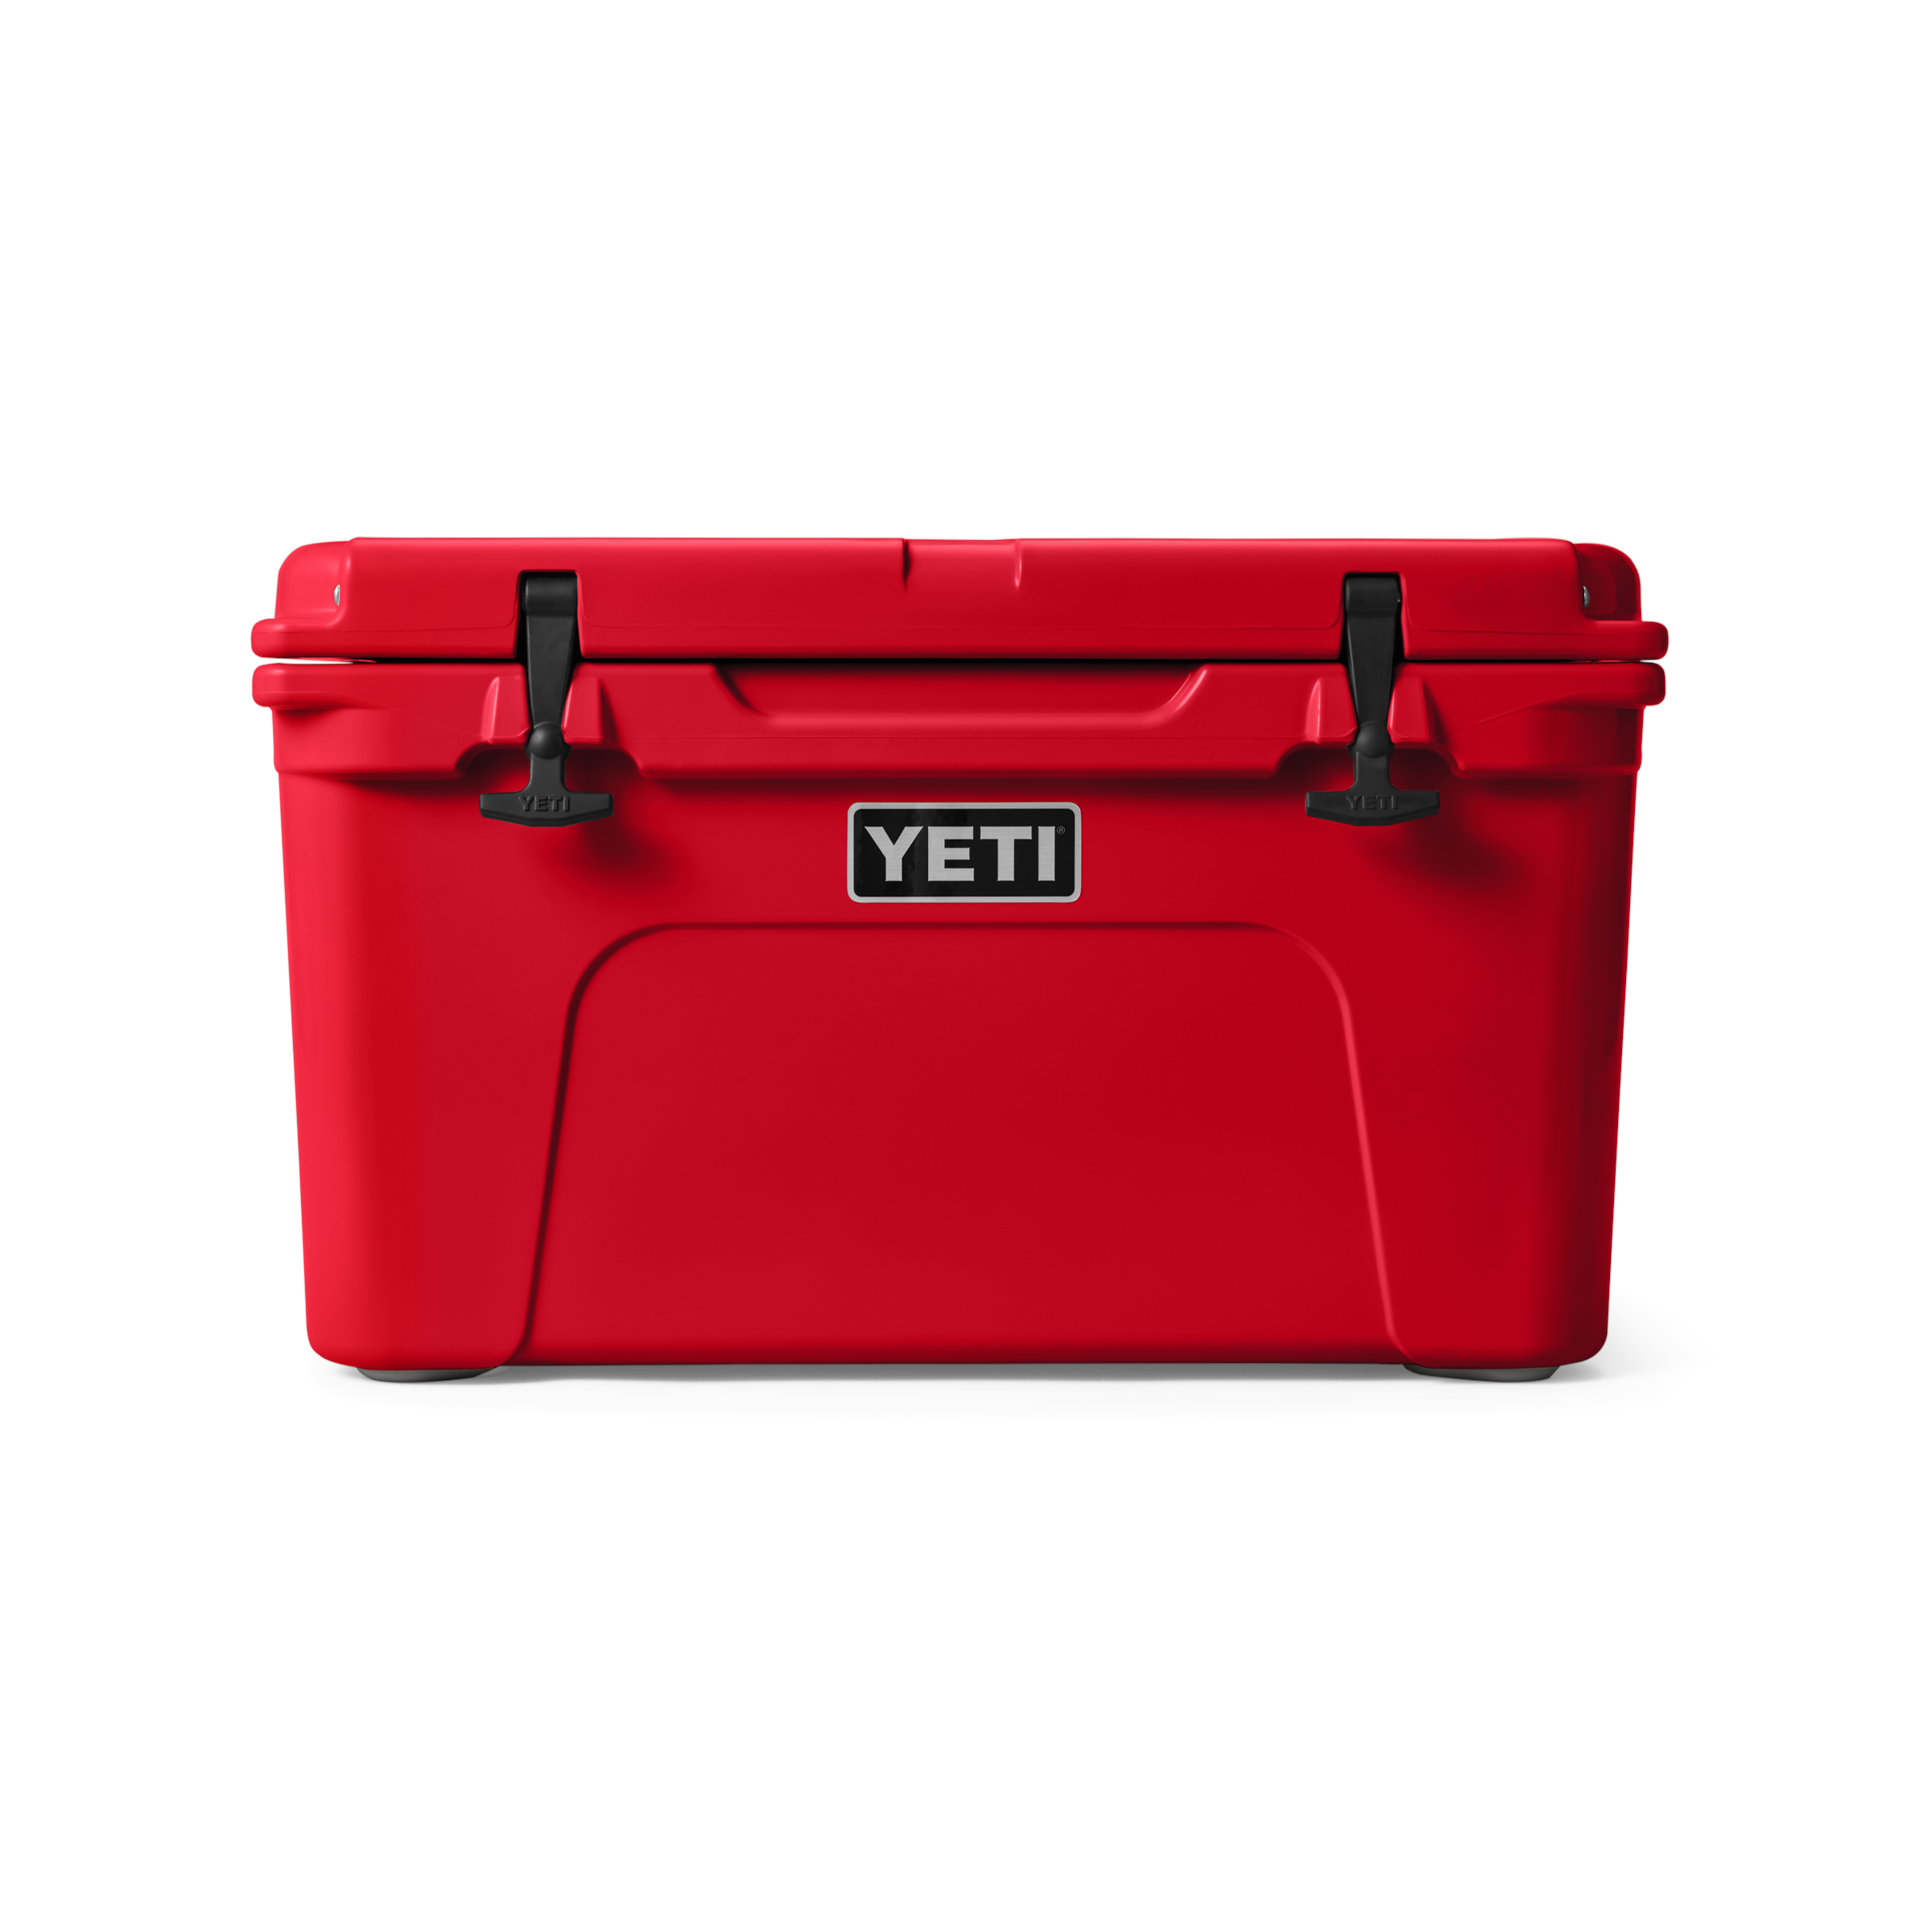 YETI Tundra 45 Limited Edition Cooler - Reef Blue